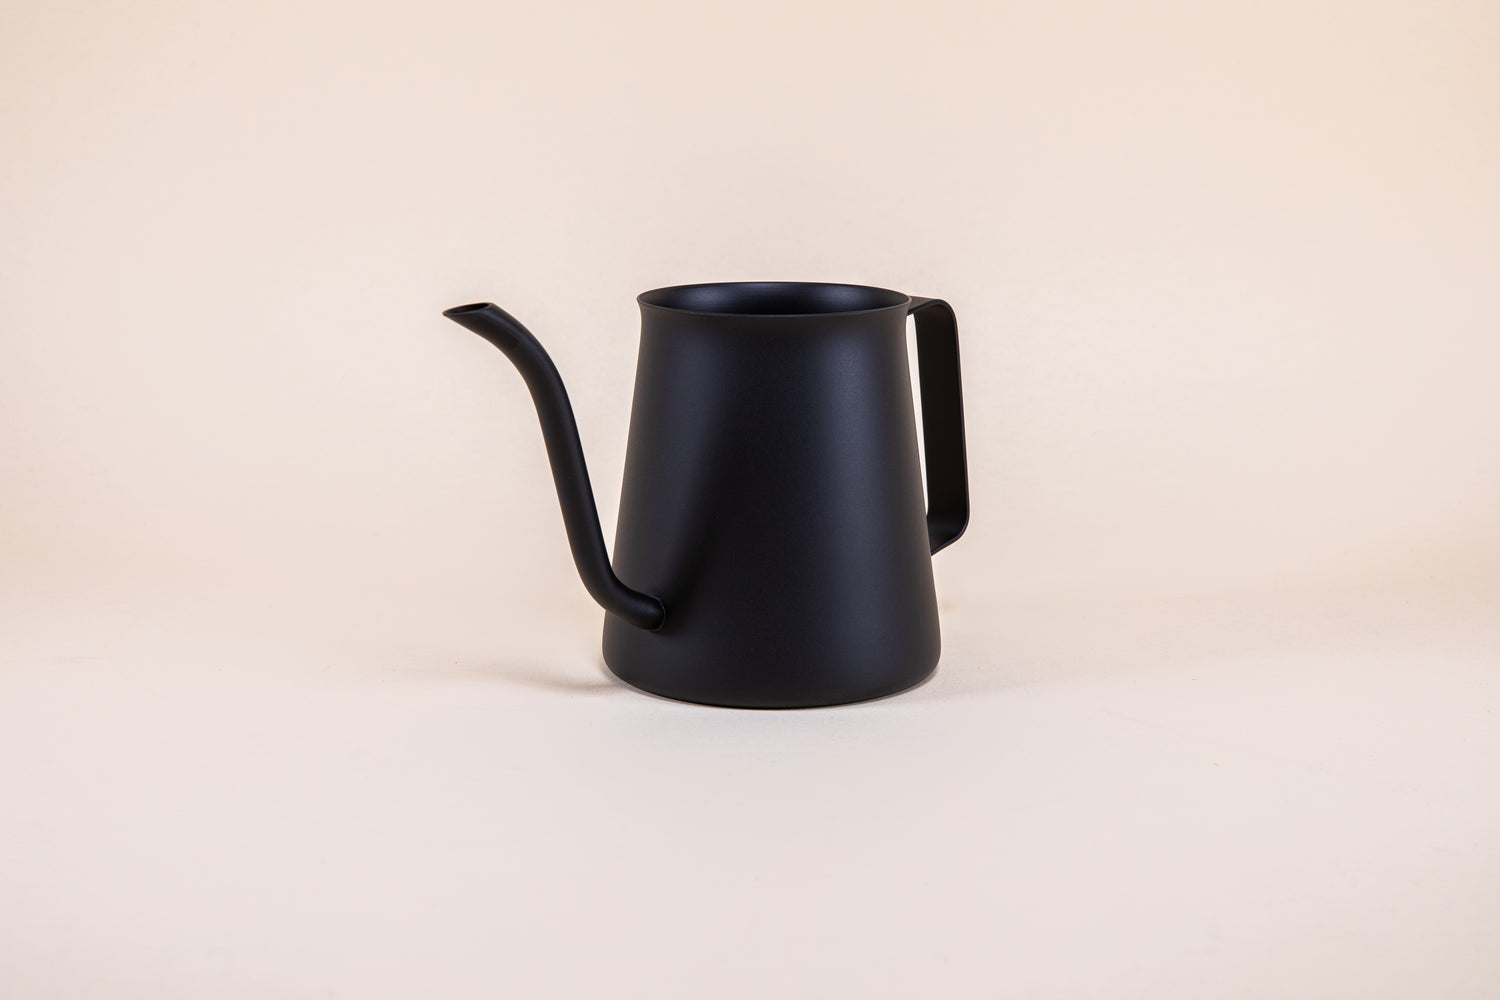 All black metal kettle with flared top, gooseneck spout, and handle on a light background. 